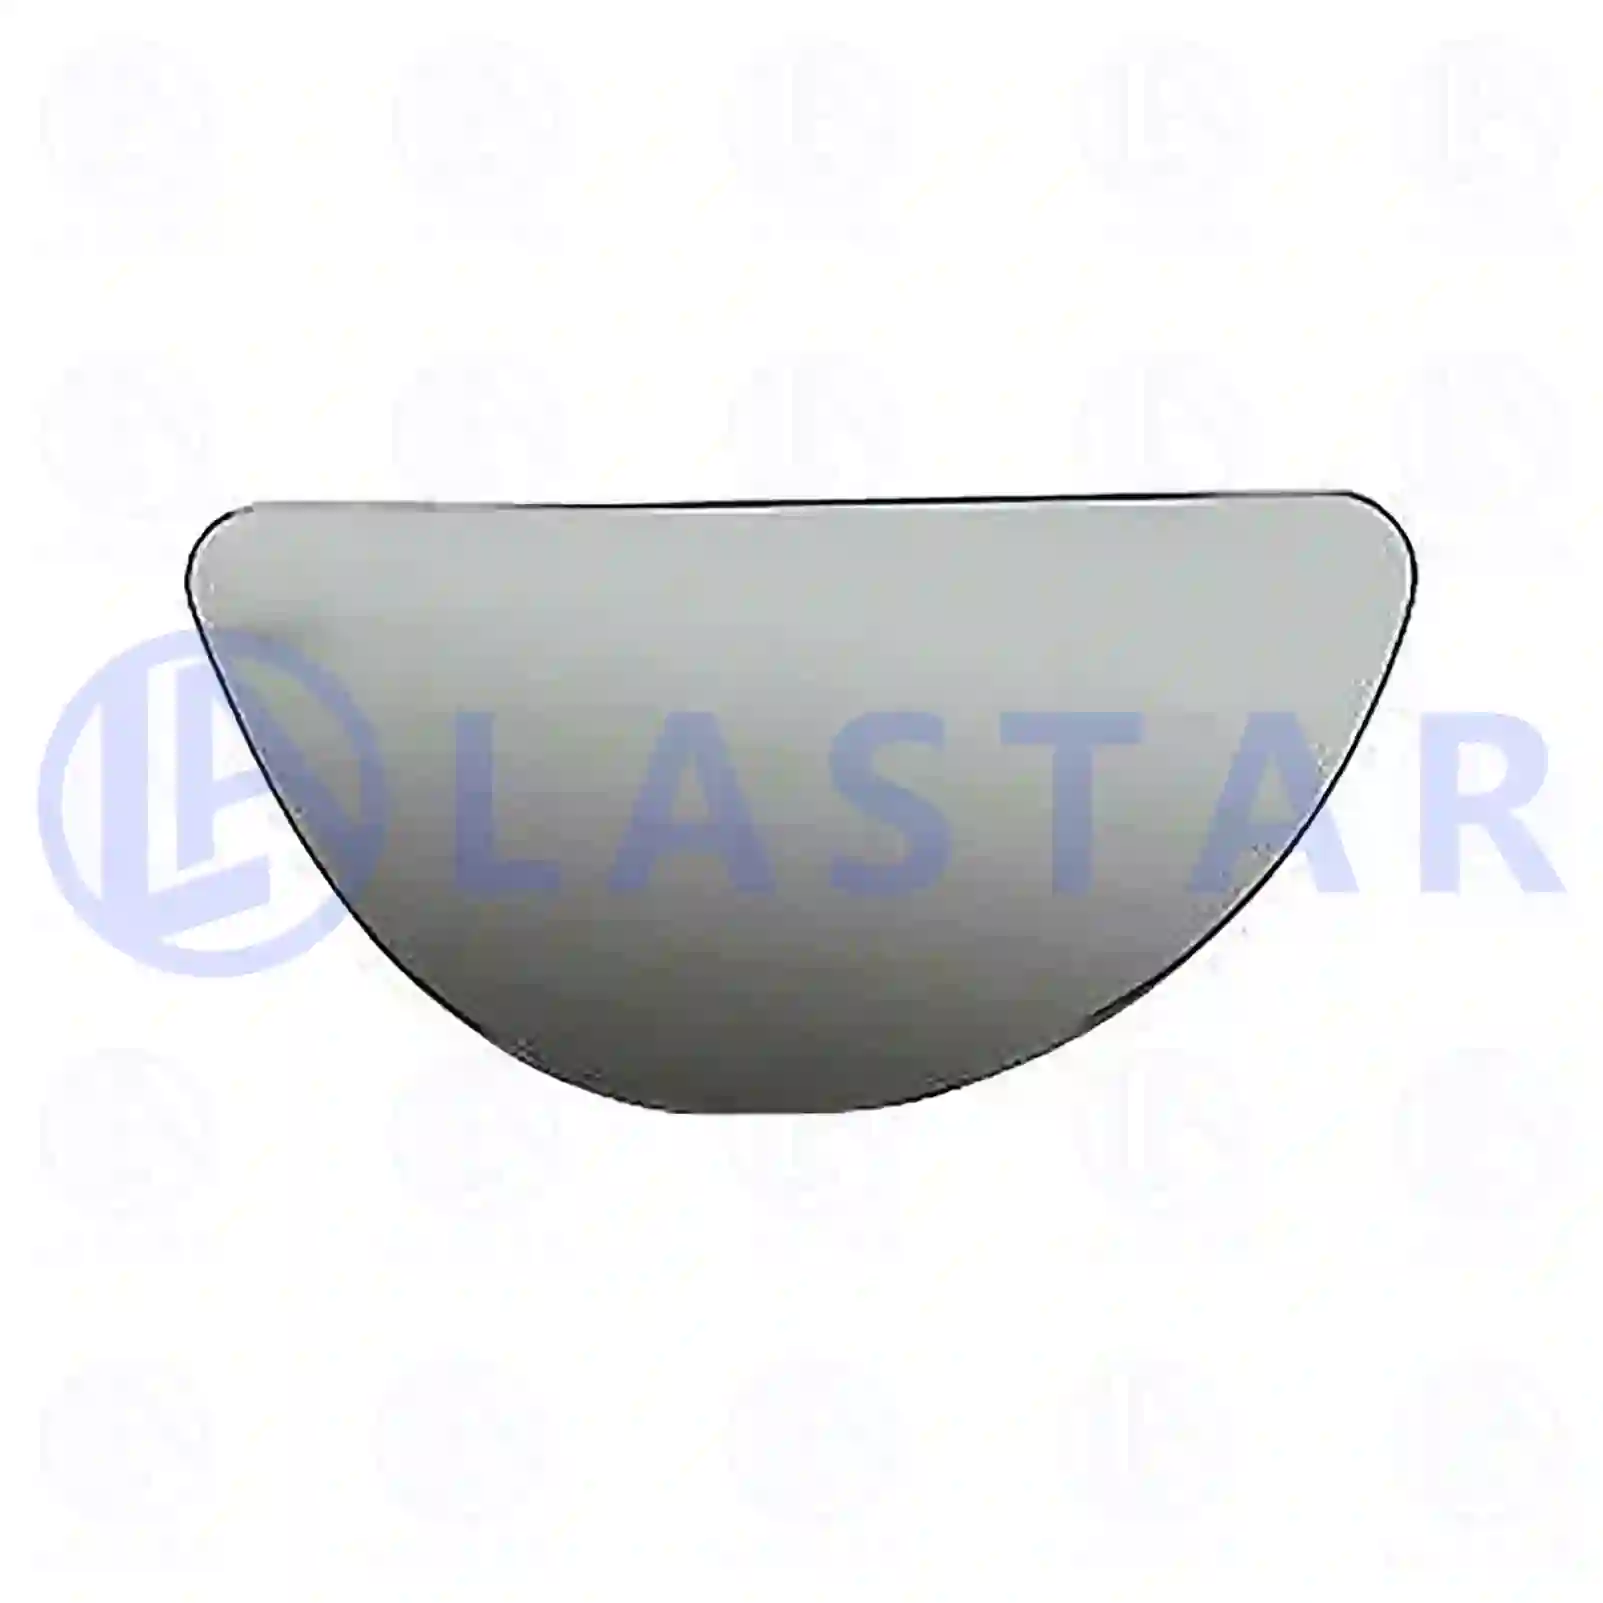 Mirror glass, right, lower, 77718462, 2C11-17A700-AA, 4458055 ||  77718462 Lastar Spare Part | Truck Spare Parts, Auotomotive Spare Parts Mirror glass, right, lower, 77718462, 2C11-17A700-AA, 4458055 ||  77718462 Lastar Spare Part | Truck Spare Parts, Auotomotive Spare Parts